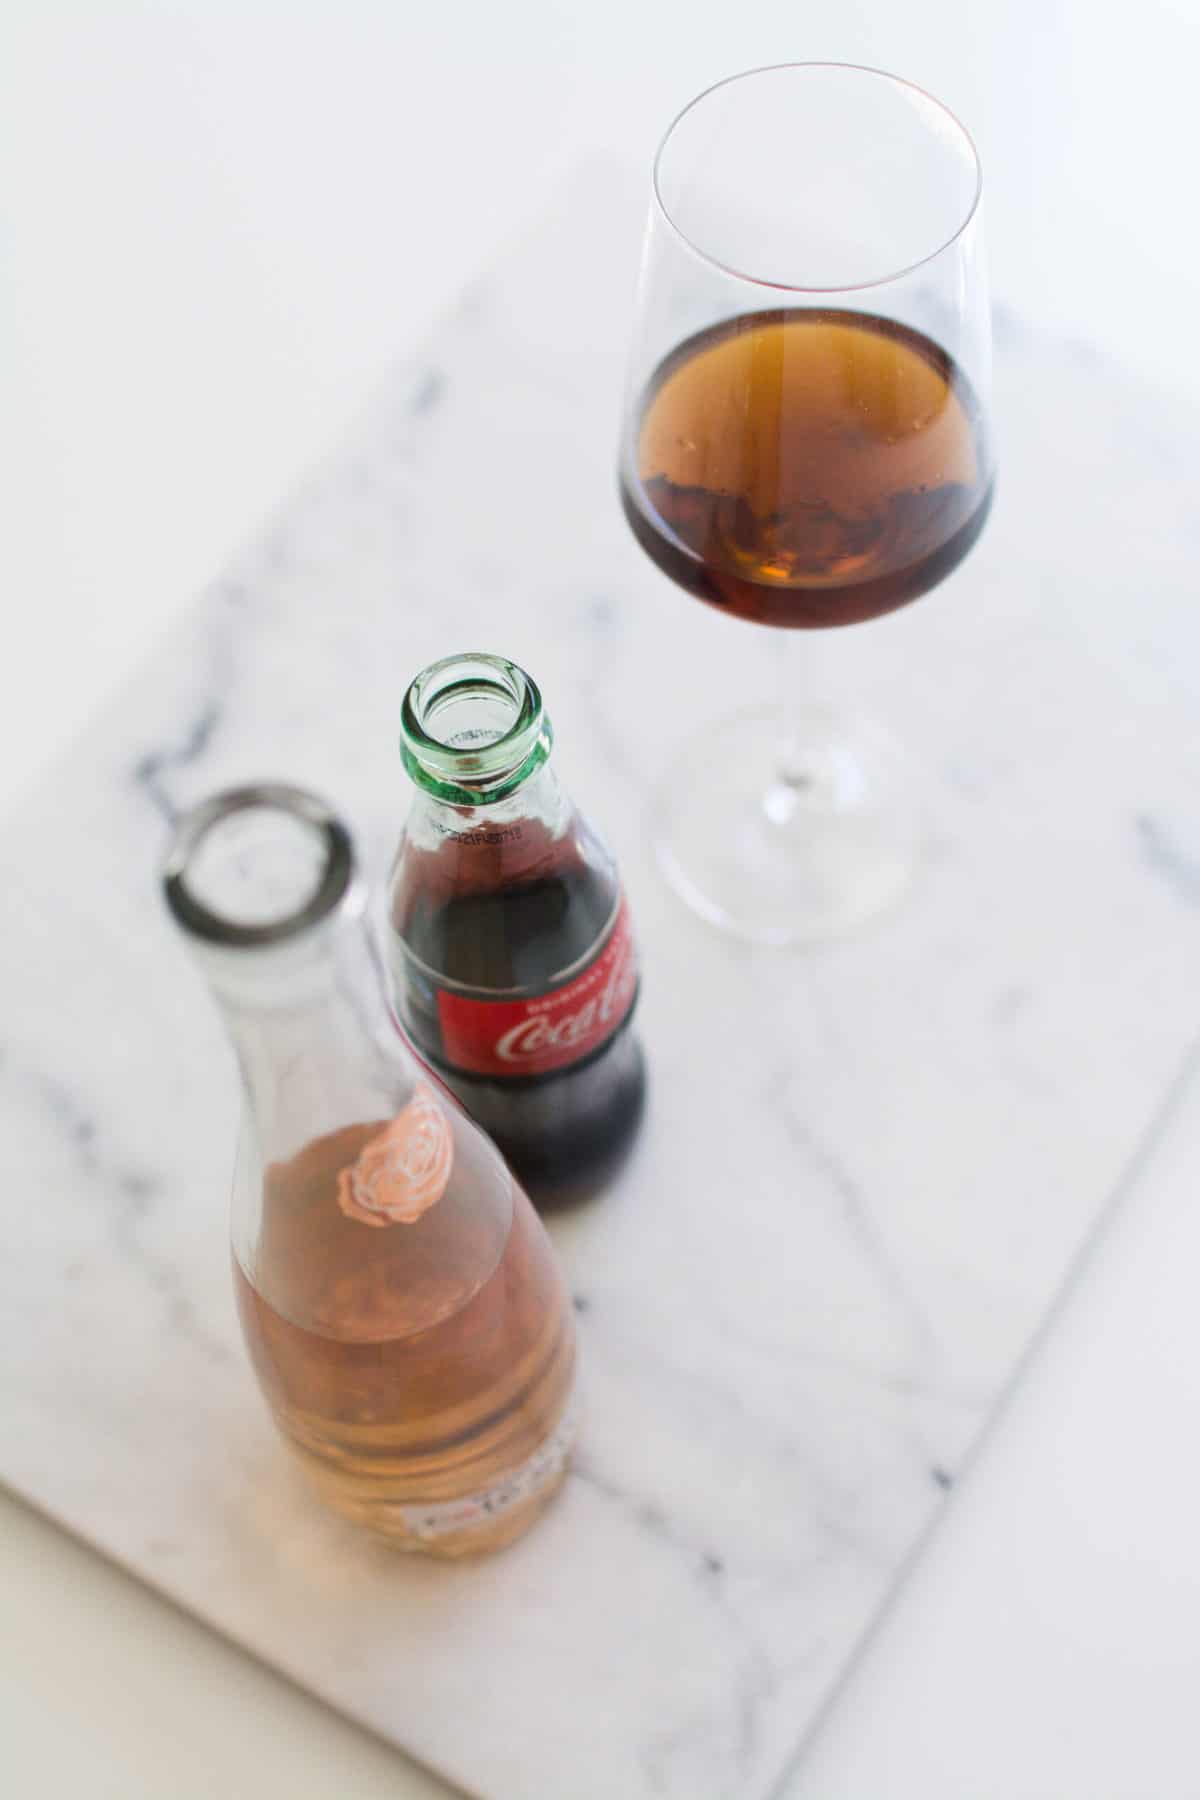 Overhead shot of a cutting board with a bottle of wine and a coke next to a wine glass.